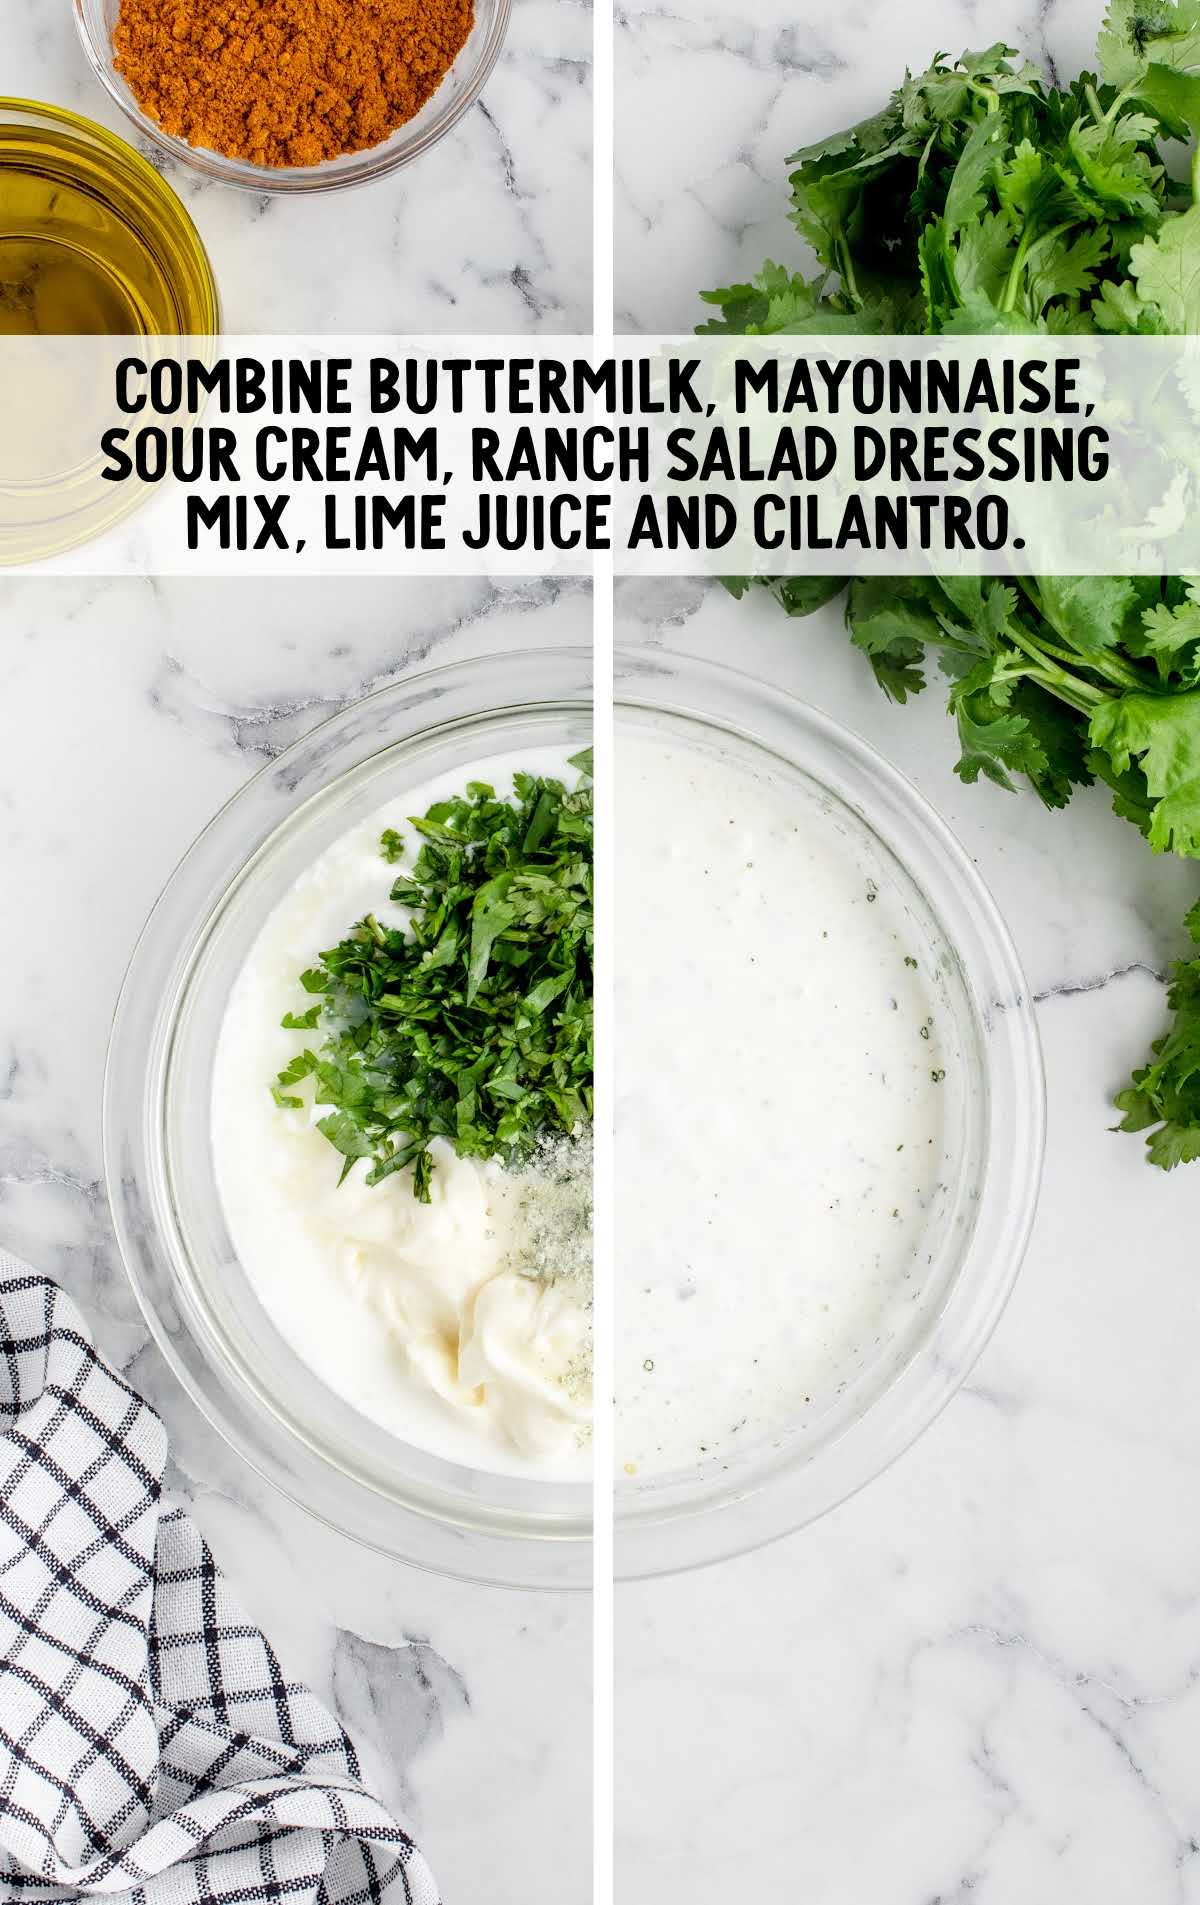 buttermilk, mayonnaise, sour cream, ranch salad dressing mix, lime juice and cilantro mixed in a bowl